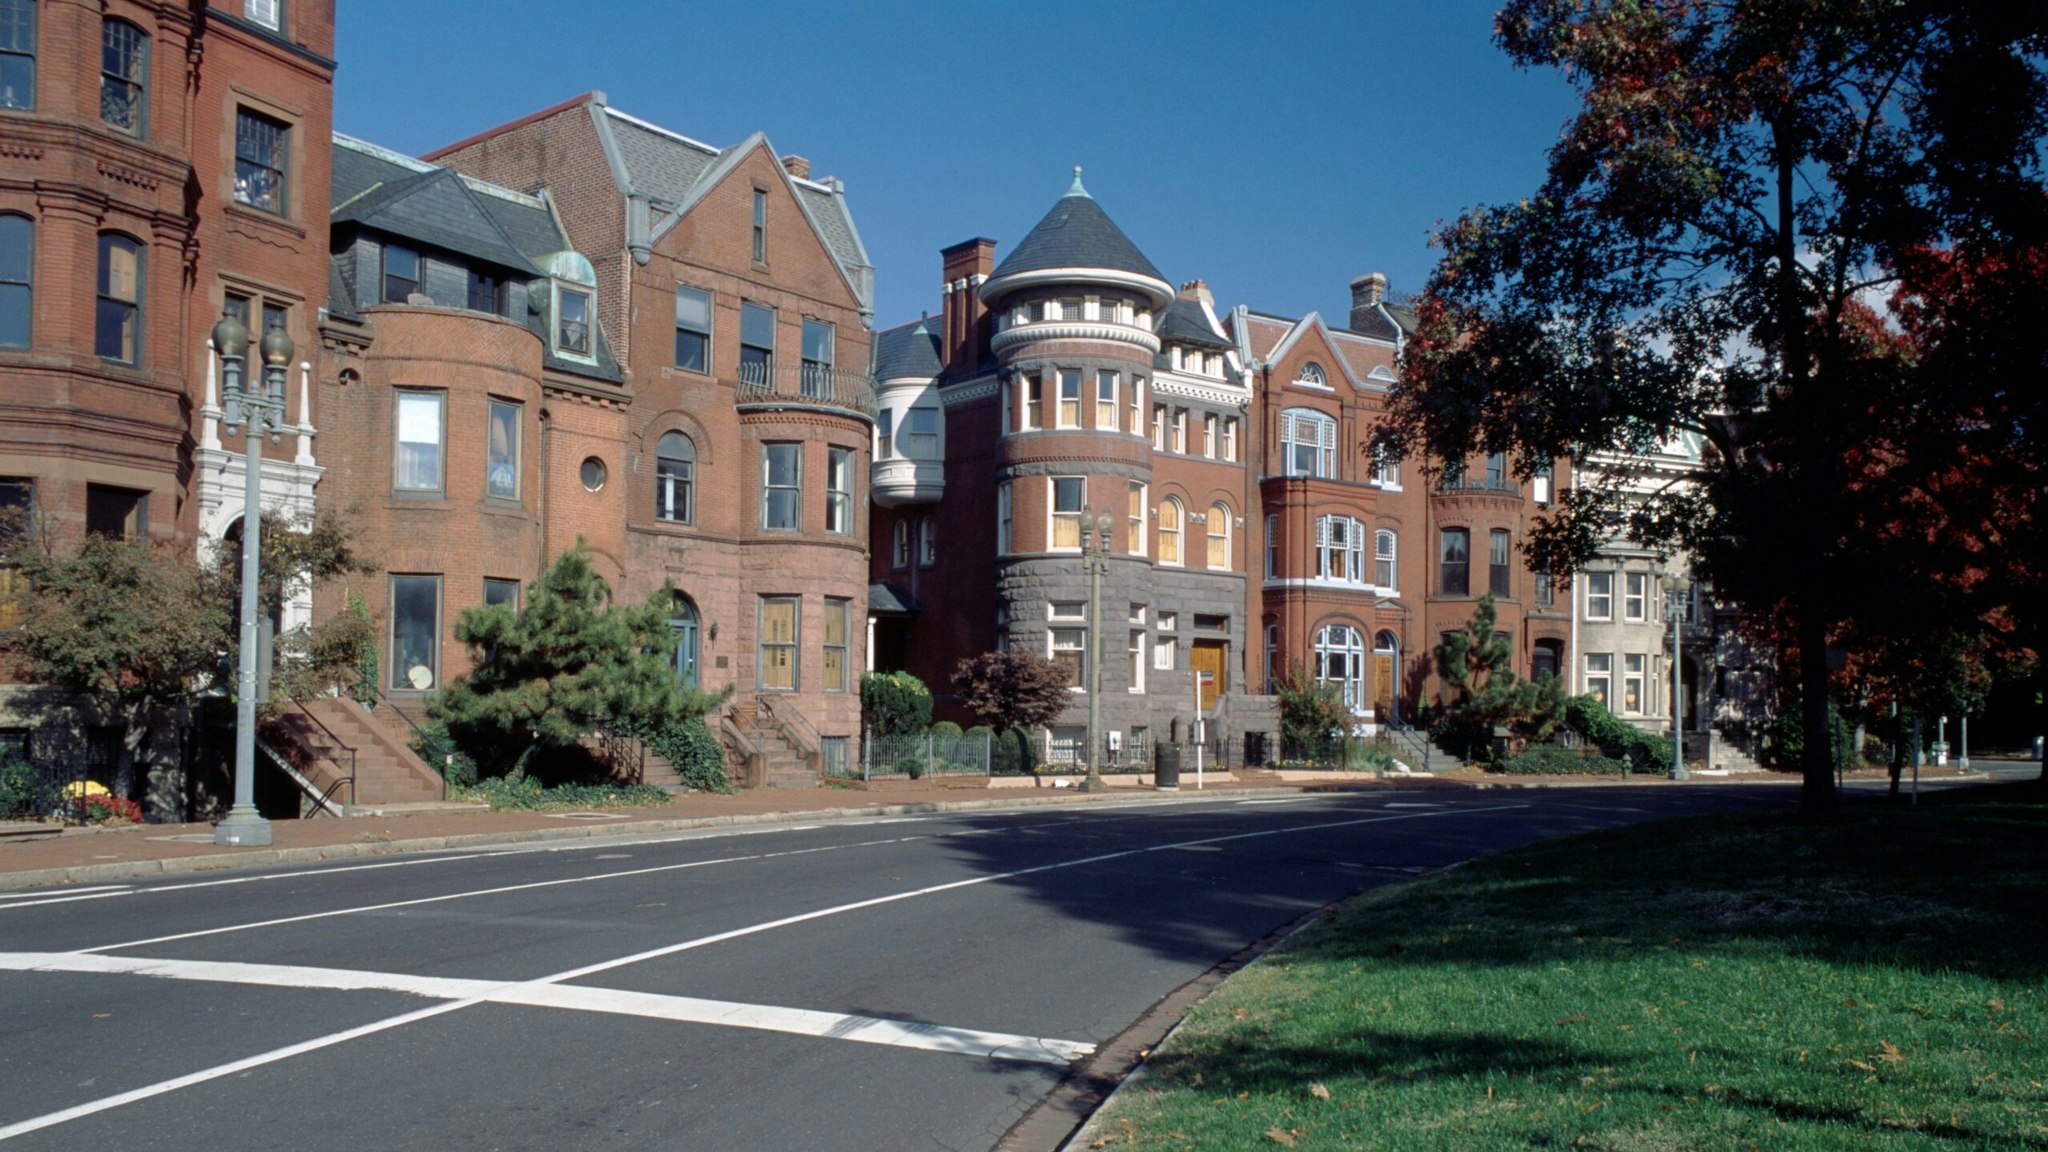 UNITED STATES - OCTOBER 10: 19th century residences, Logan Circle historic district, Washington DC, District of Columbia, United States of America.